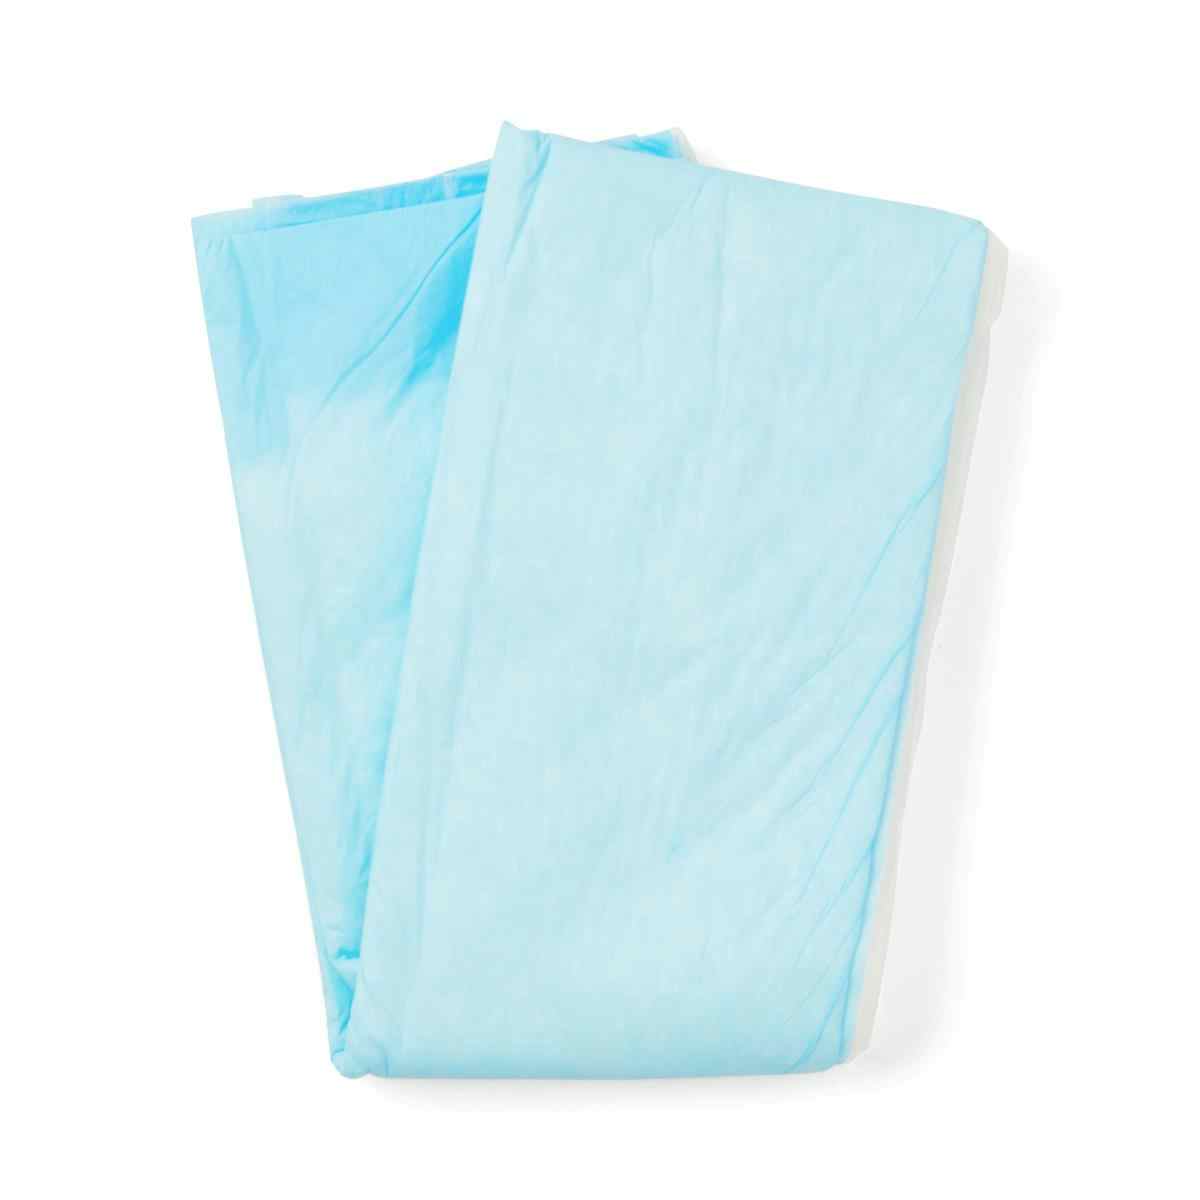 Medline Standard Disposable Underpads, Moderate Absorbency, MSC281241, 23" X 24" - Case of 200